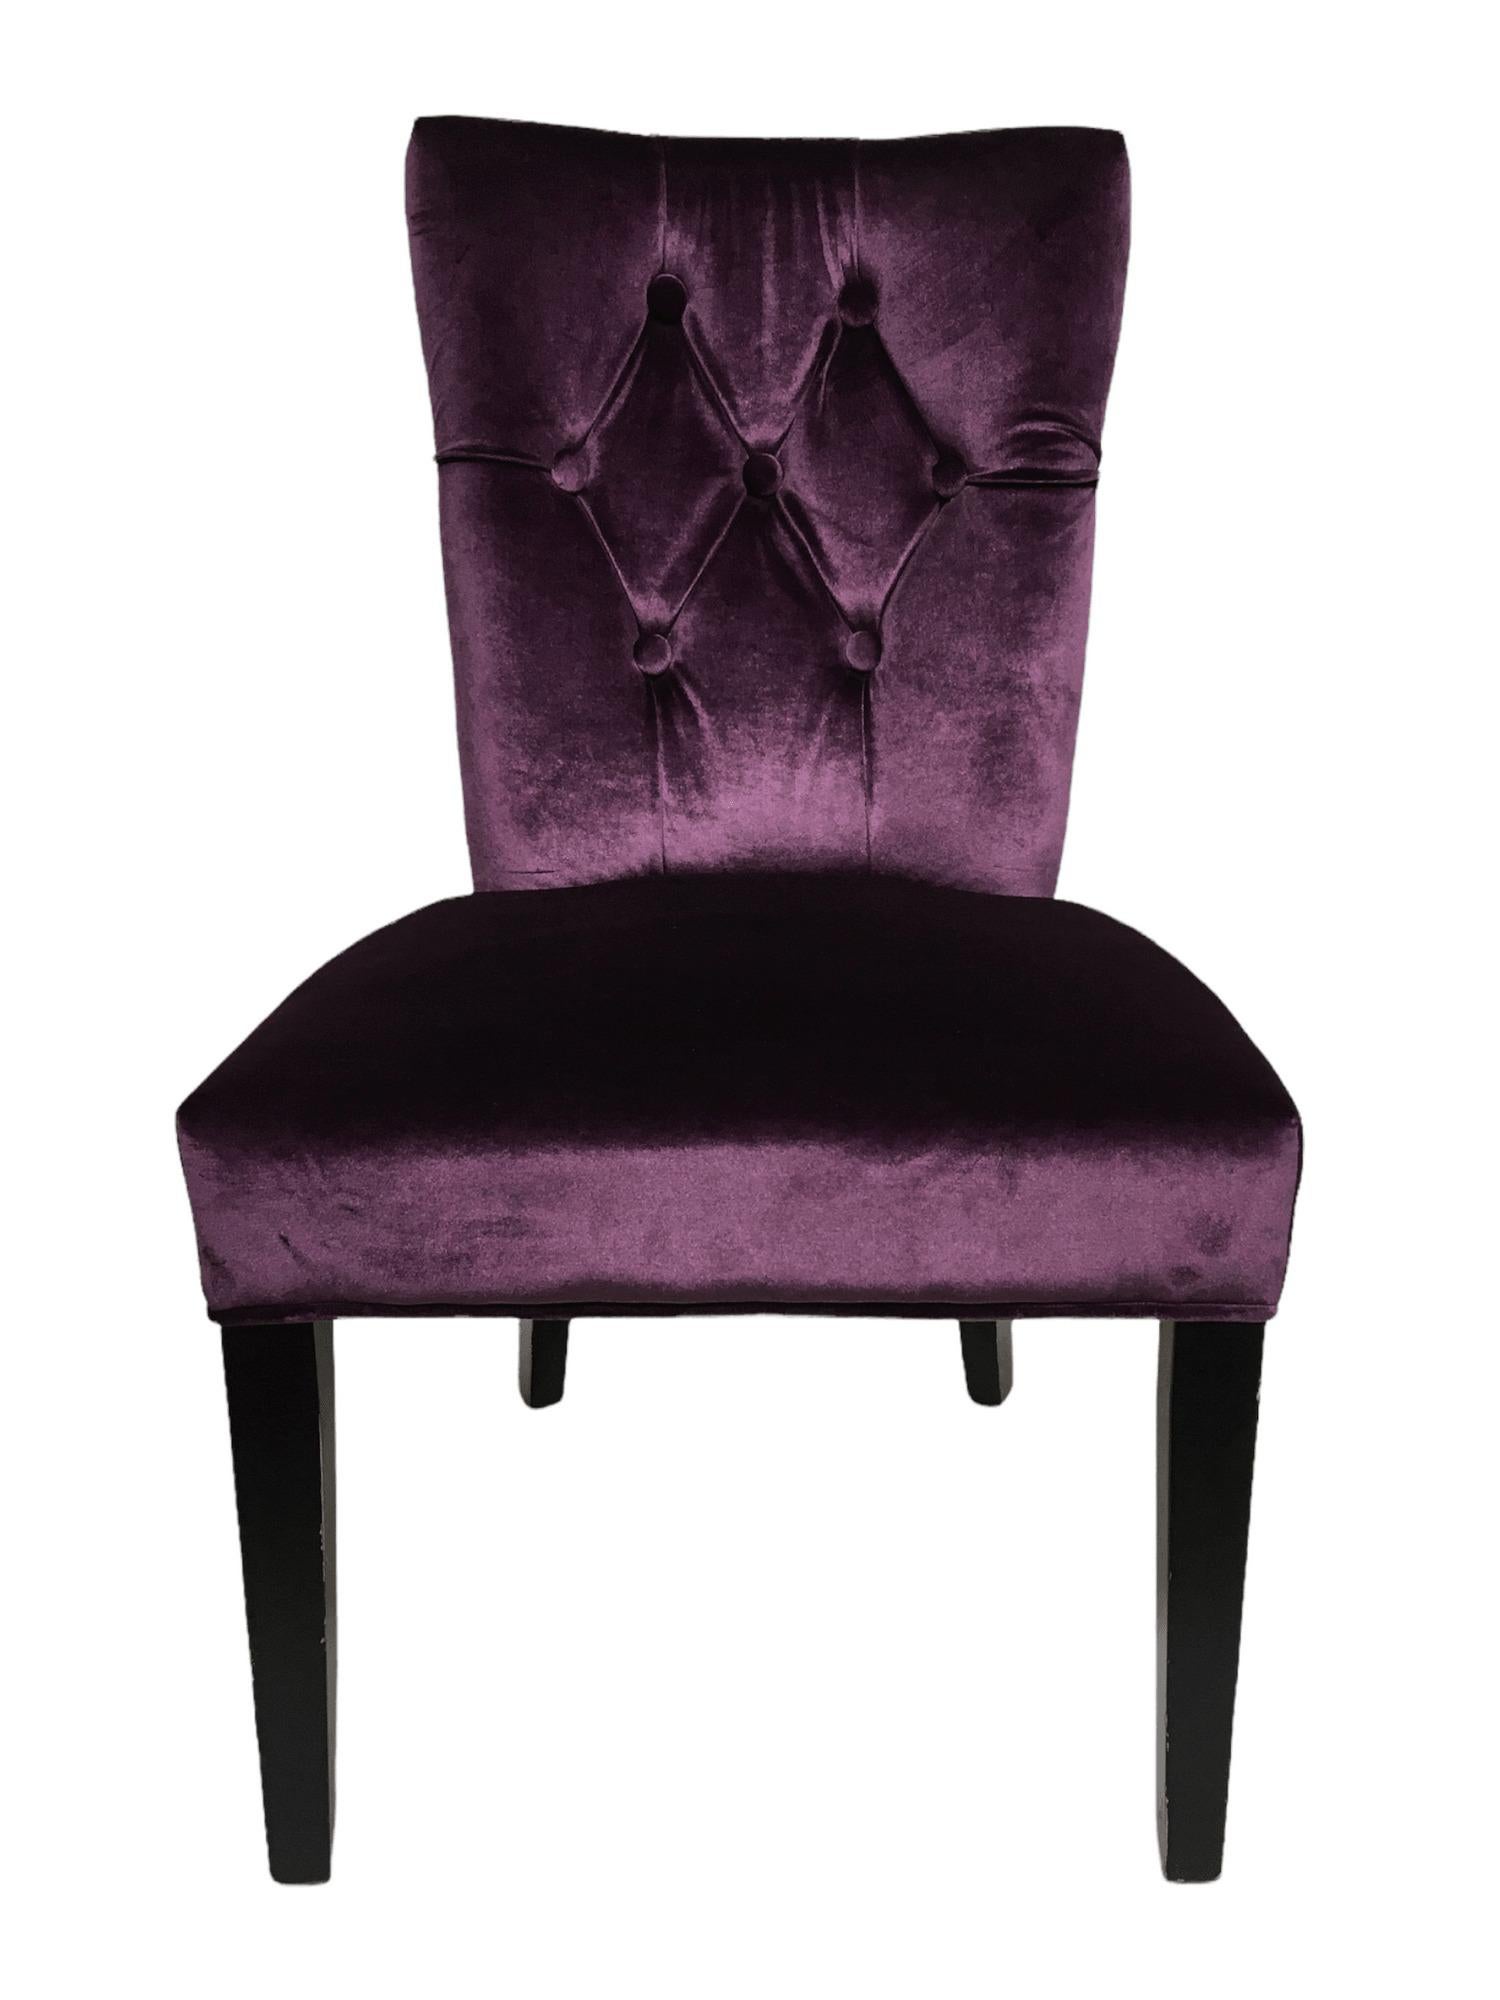 Other Vintage Purple Velvet Chairs with Tufted Padded Backrest. Set of 2